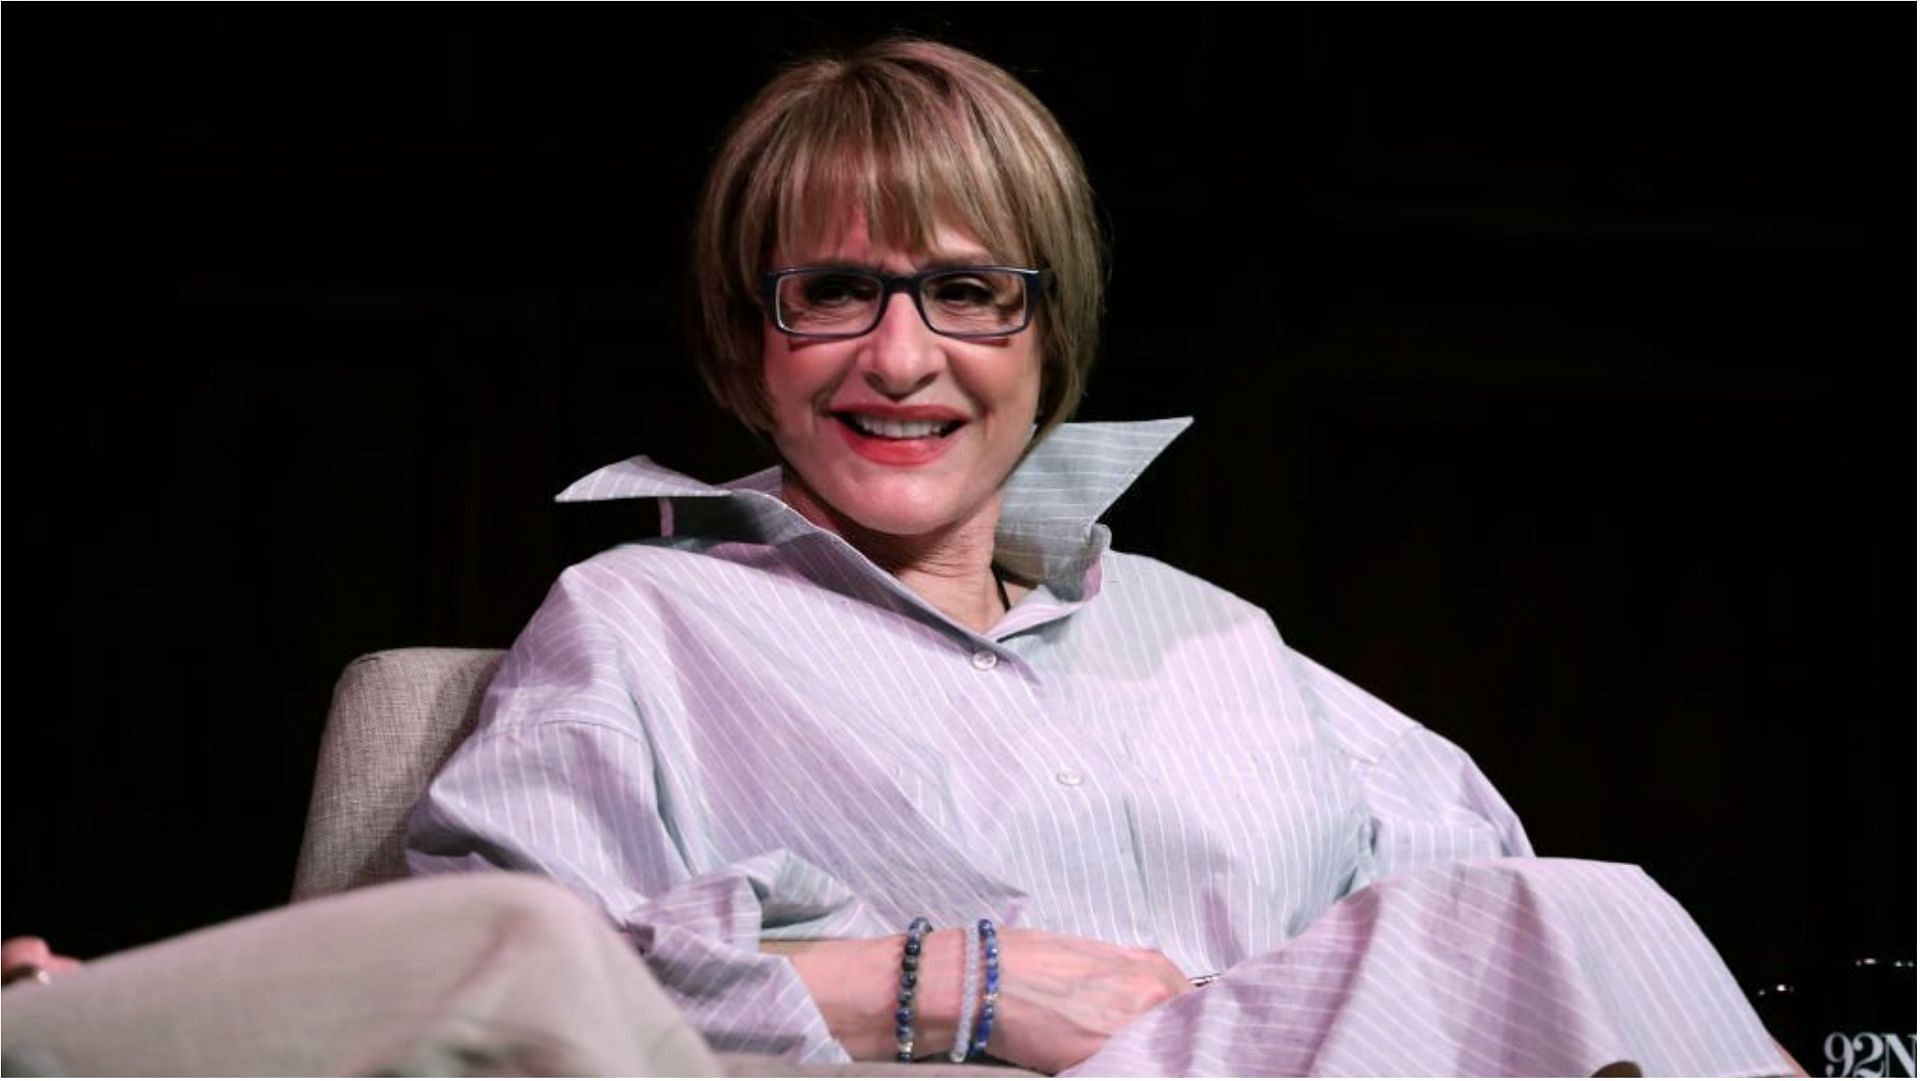 Patti LuPone&#039;s upcoming projects include a film and a series (Image via John Lamparski/Getty Images)